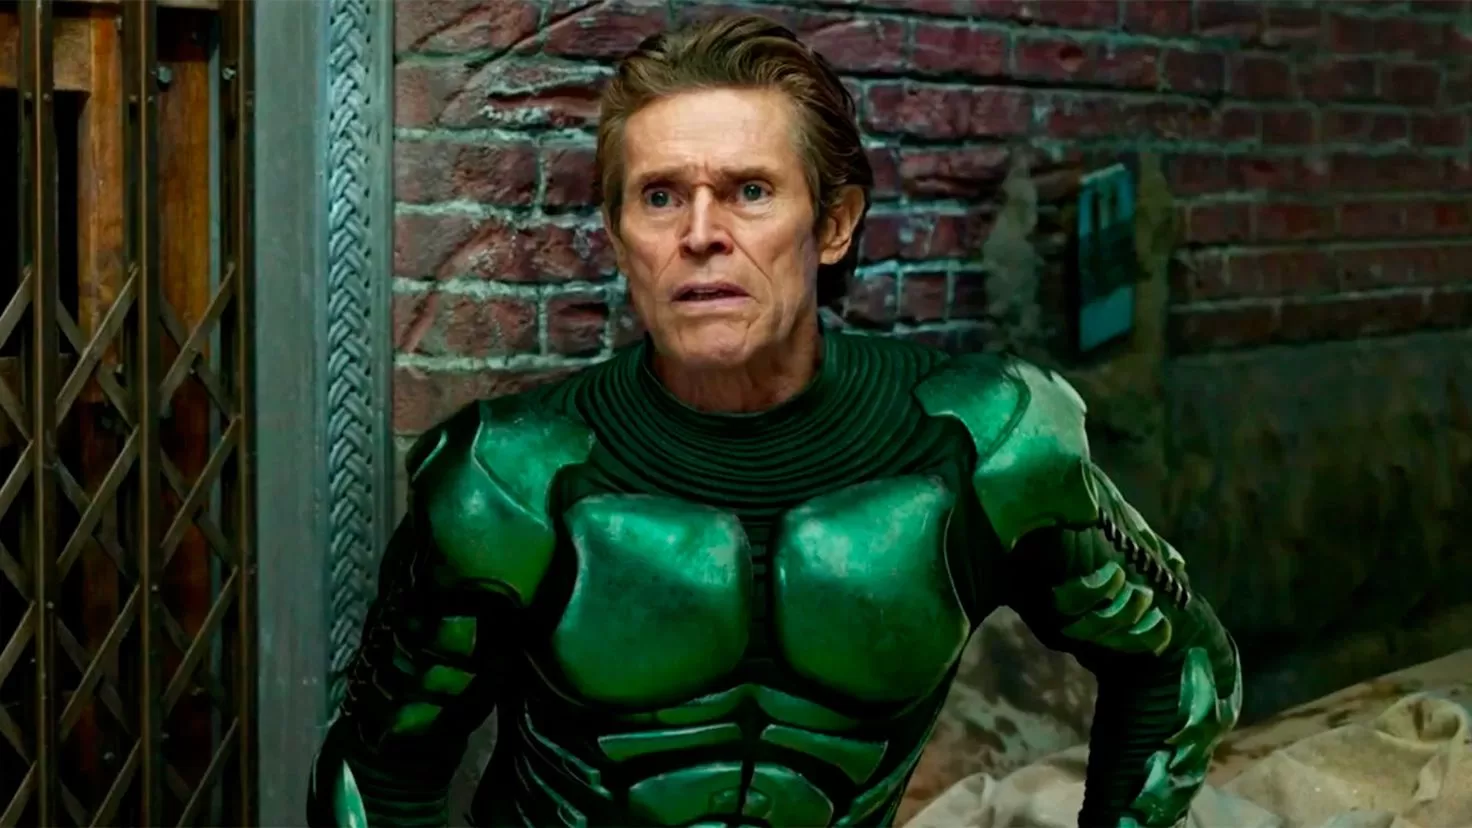 The reason why Willem Dafoe has learned to embalm corpses
